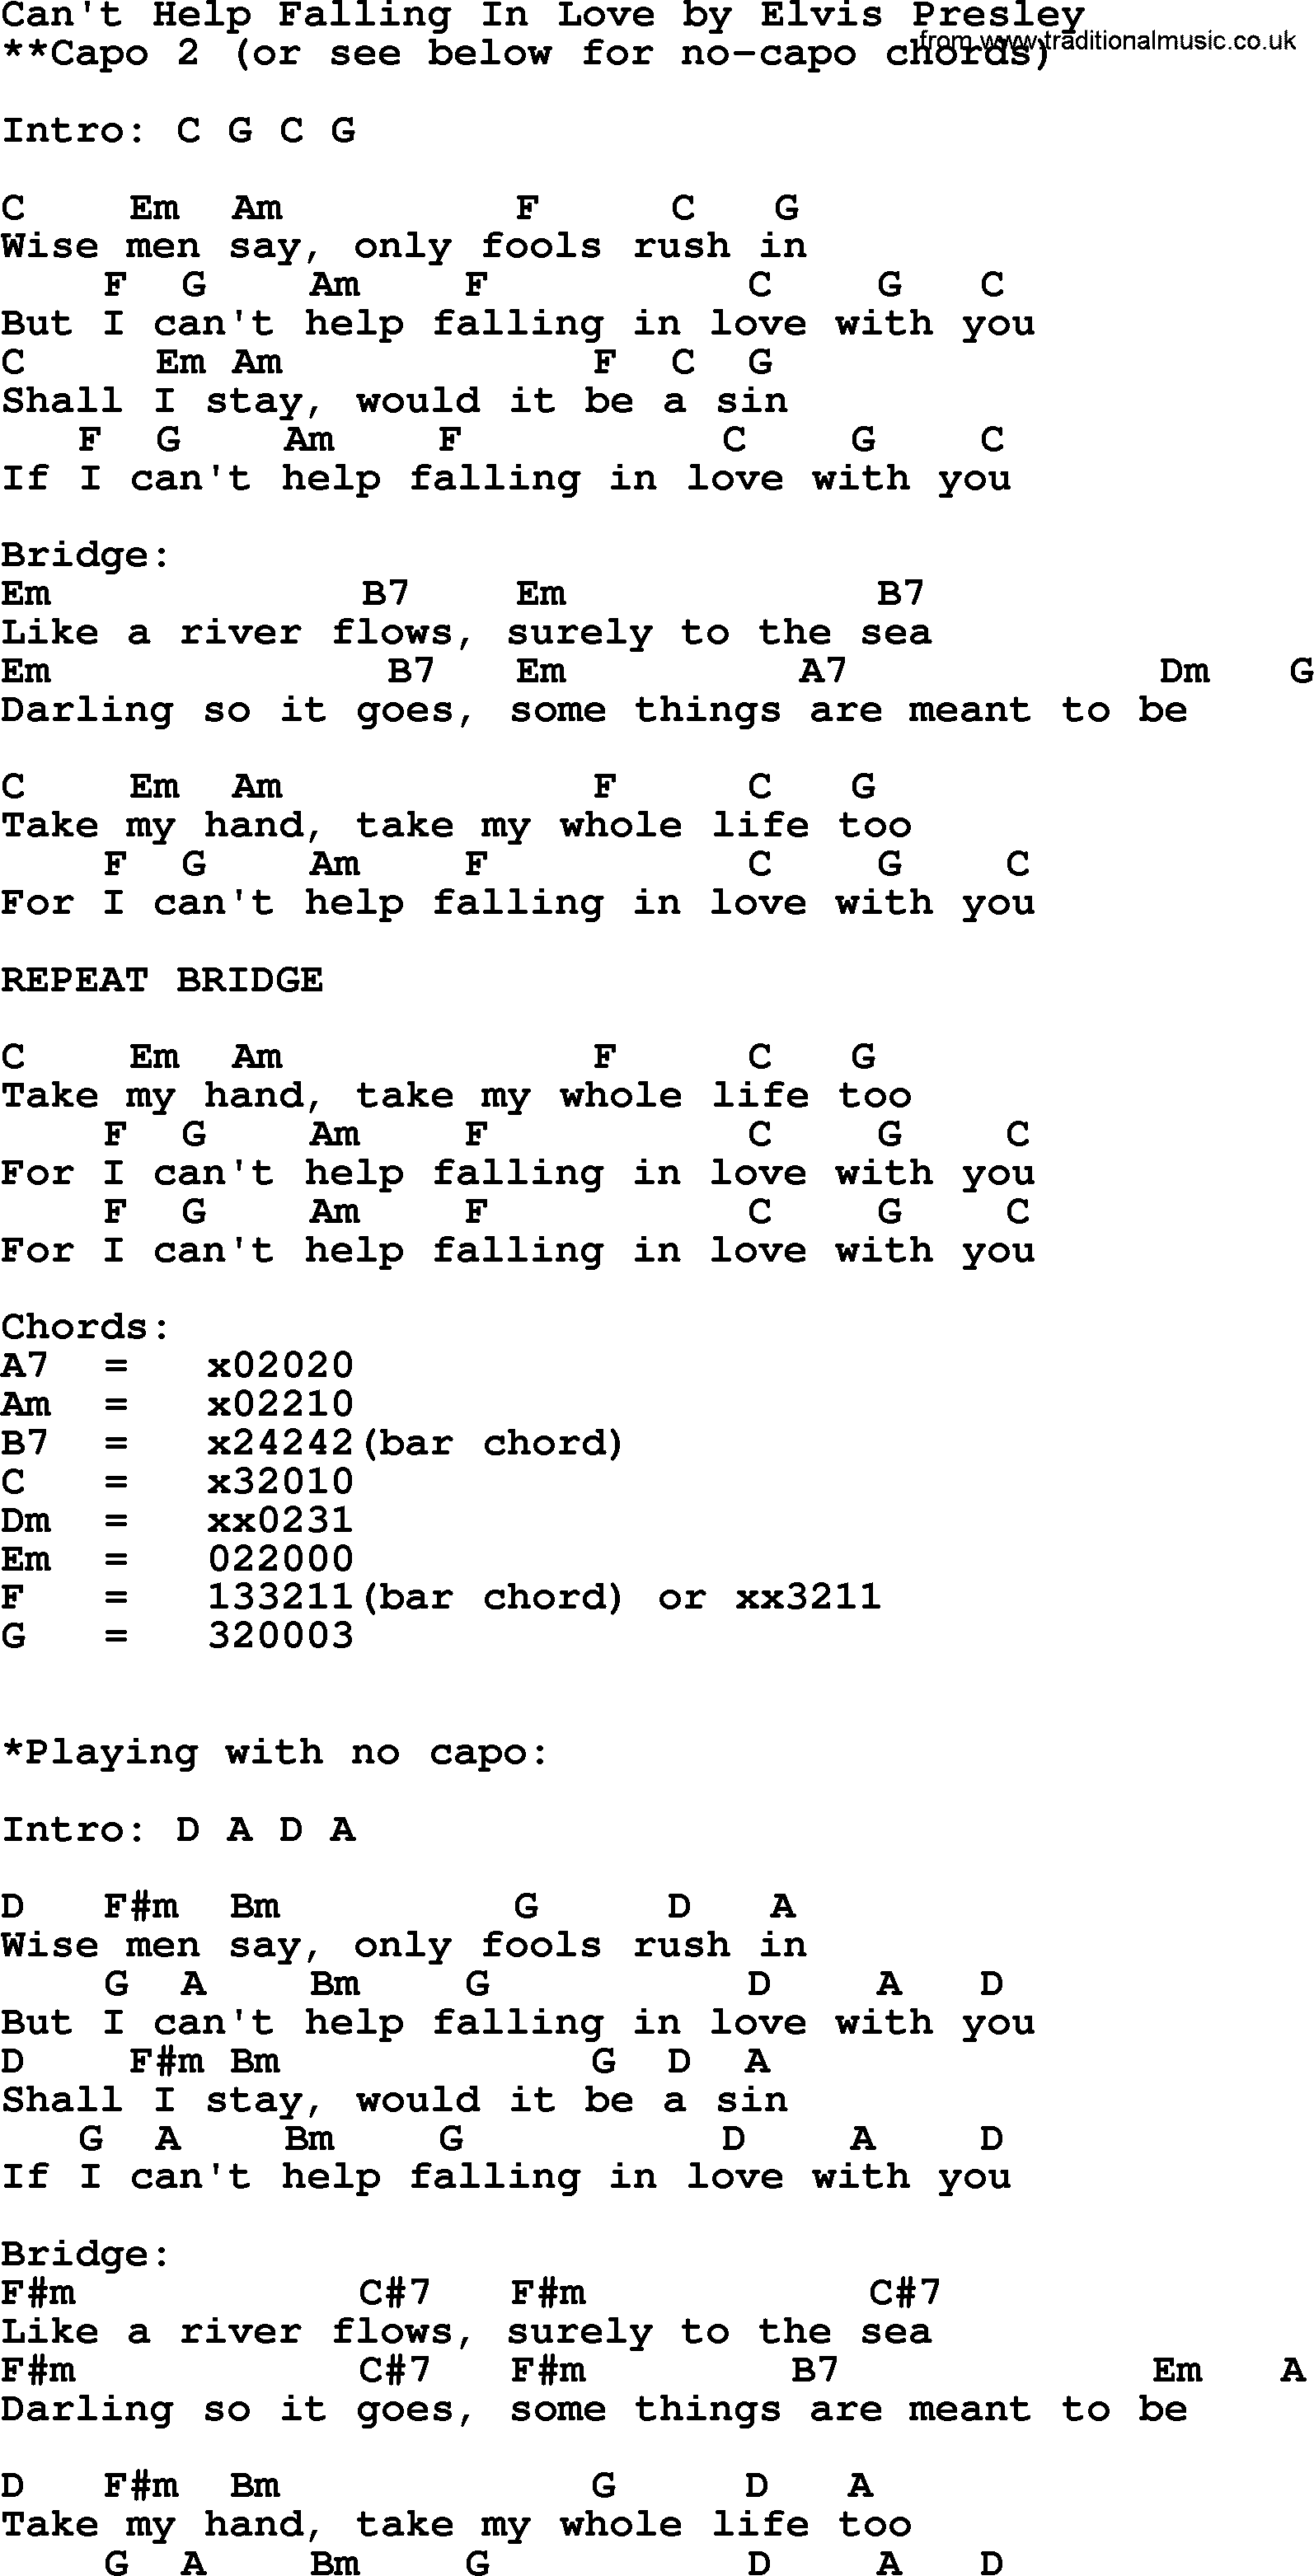 Can't Help Falling In by Elvis Presley - lyrics and chords